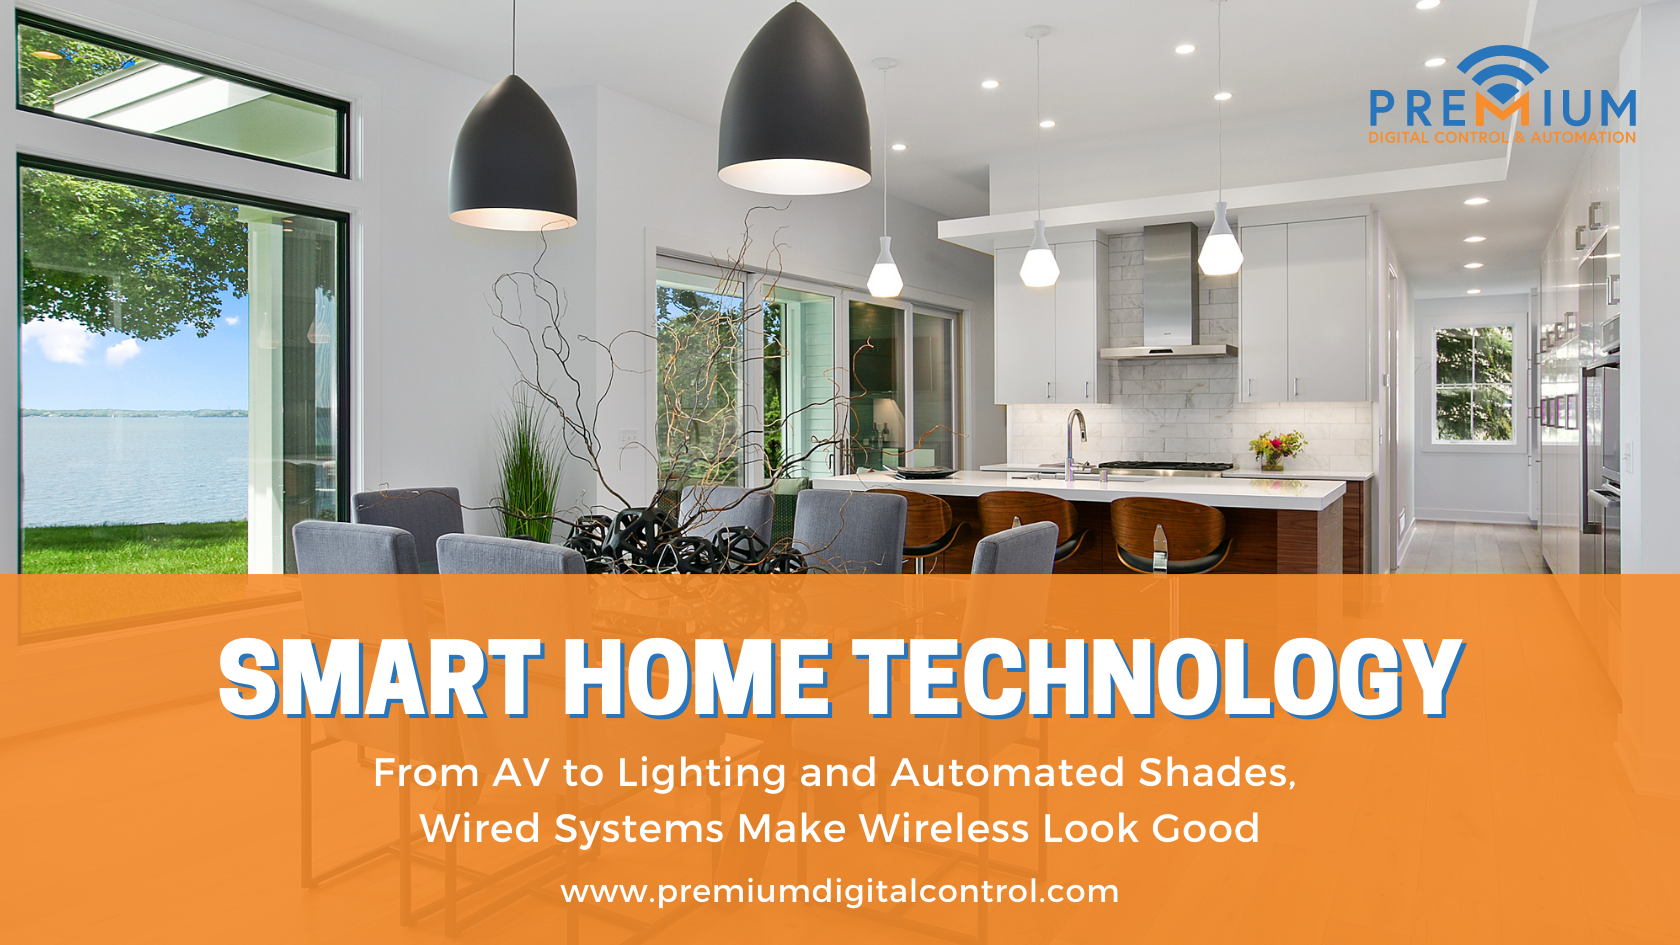 Lighting and Automated Shades